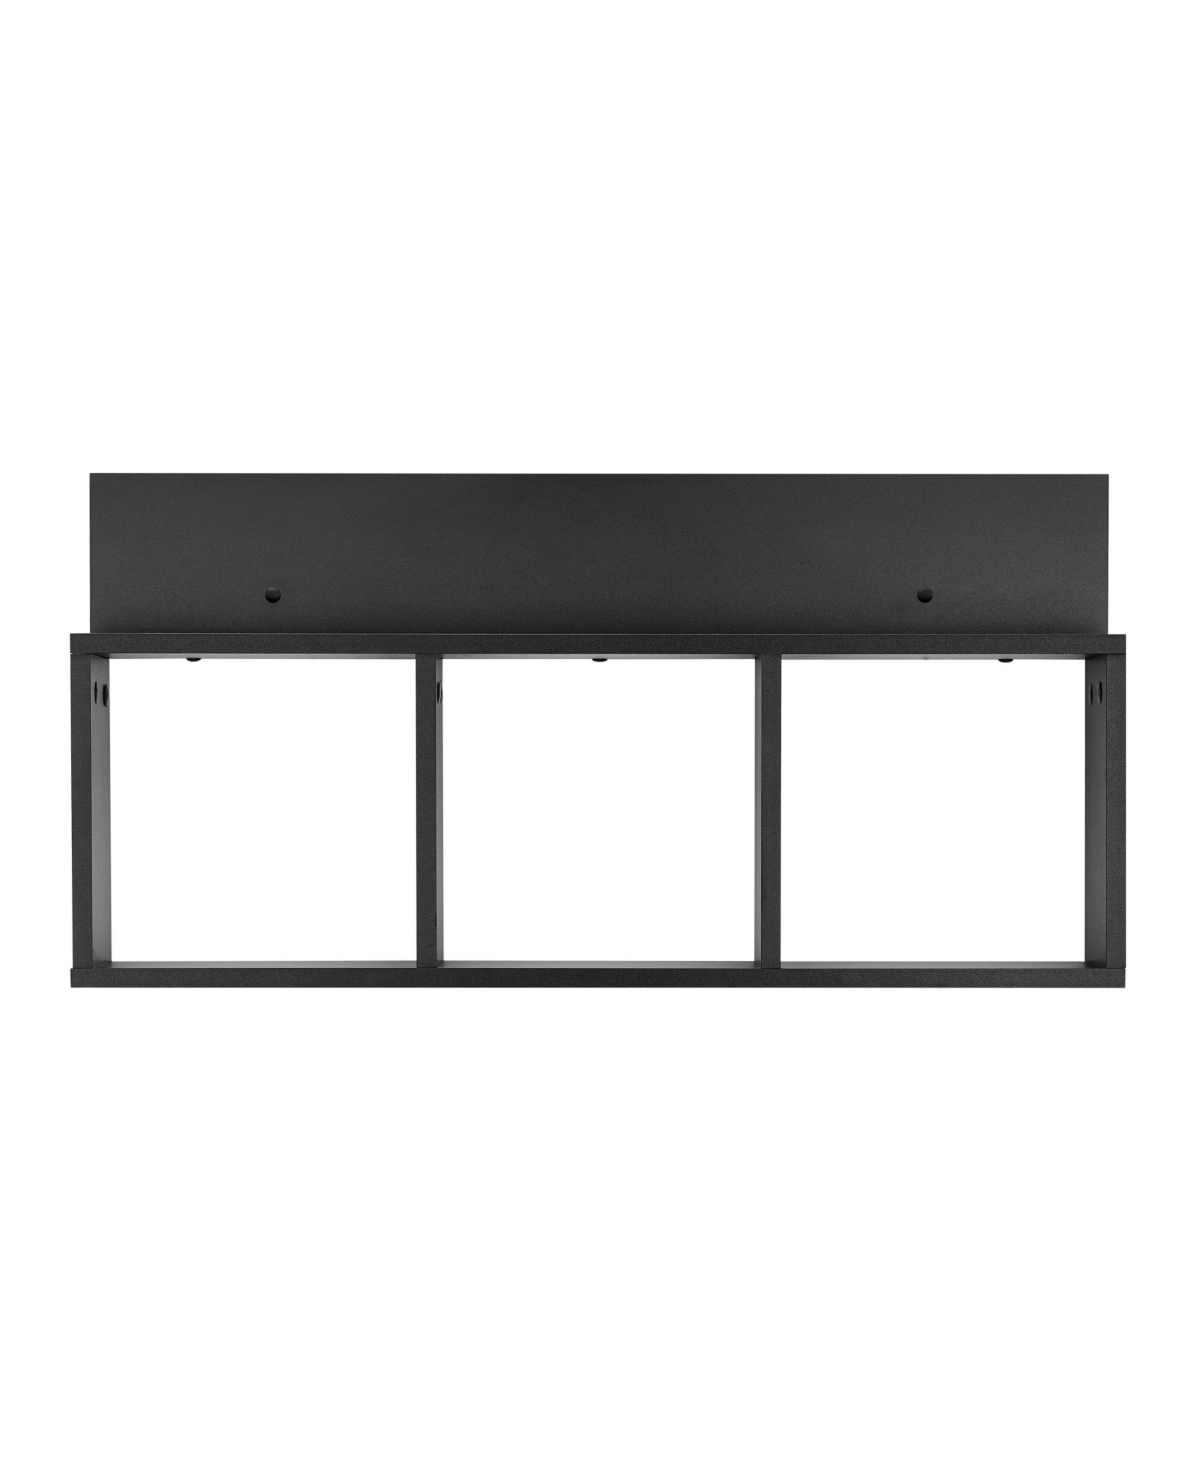 Modern 3 Cube Floating Wall Shelf with Display Ledge, Easy to Hang Wall Mounted Triple Cubby Shelf - Black